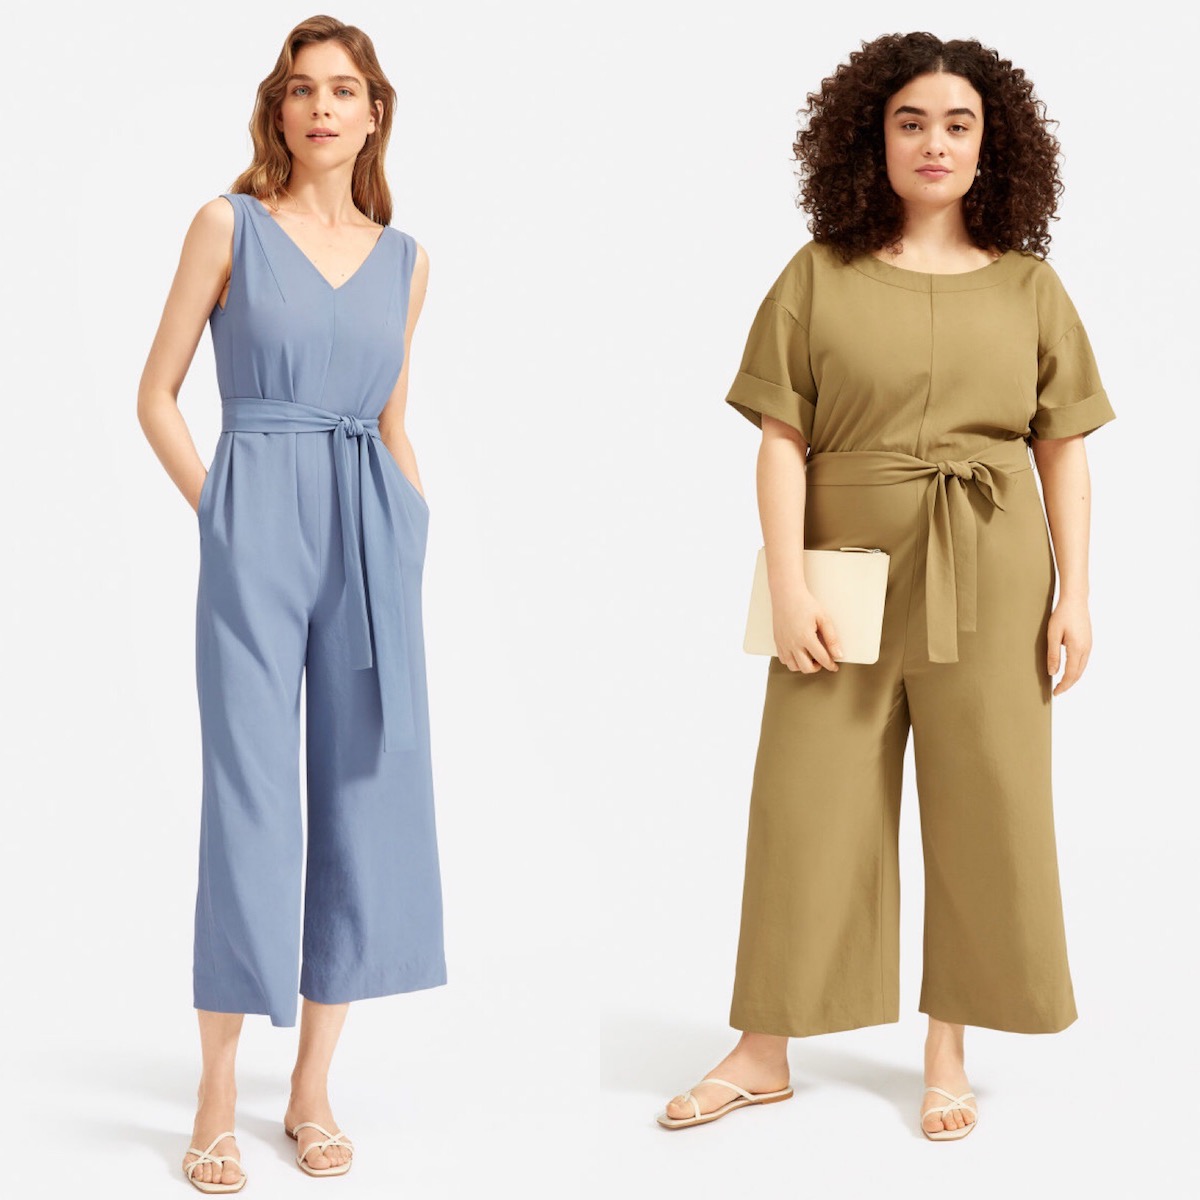 Everlane Japanese GoWeave Jumpsuit Review: Two models, shown side by side, wearing different jumpsuits. The first model is tall and skinny and wears a blue V-neck jumpsuit. The second model is curvier and has curly brown hair and wears a light olive jumpsuit with short sleeves. Both jumpsuits have wide legs.